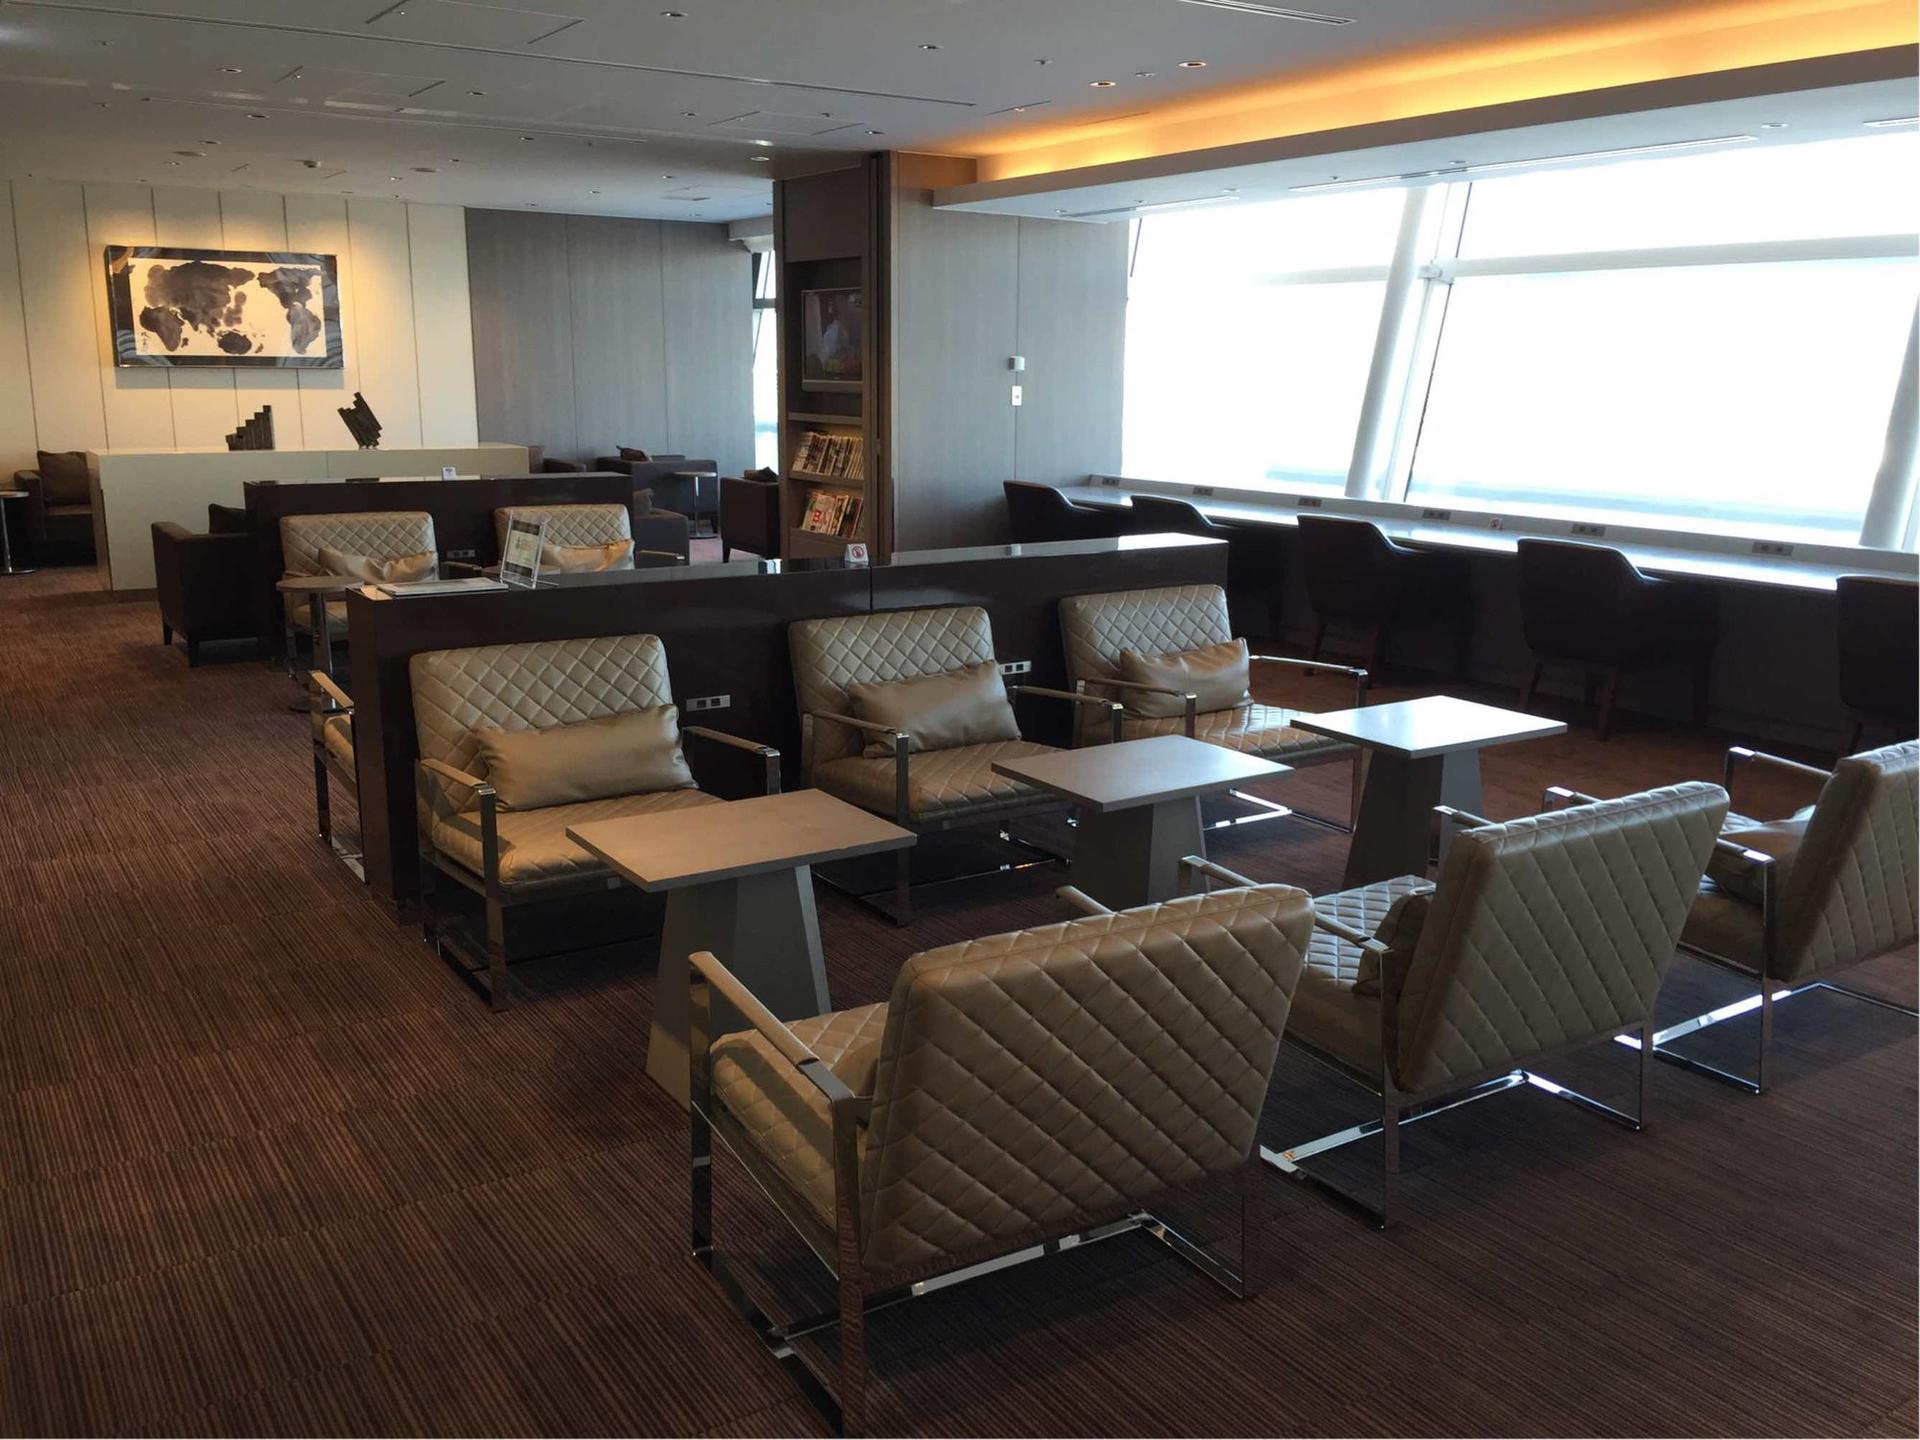 Japan Airlines JAL First Class Lounge image 17 of 43